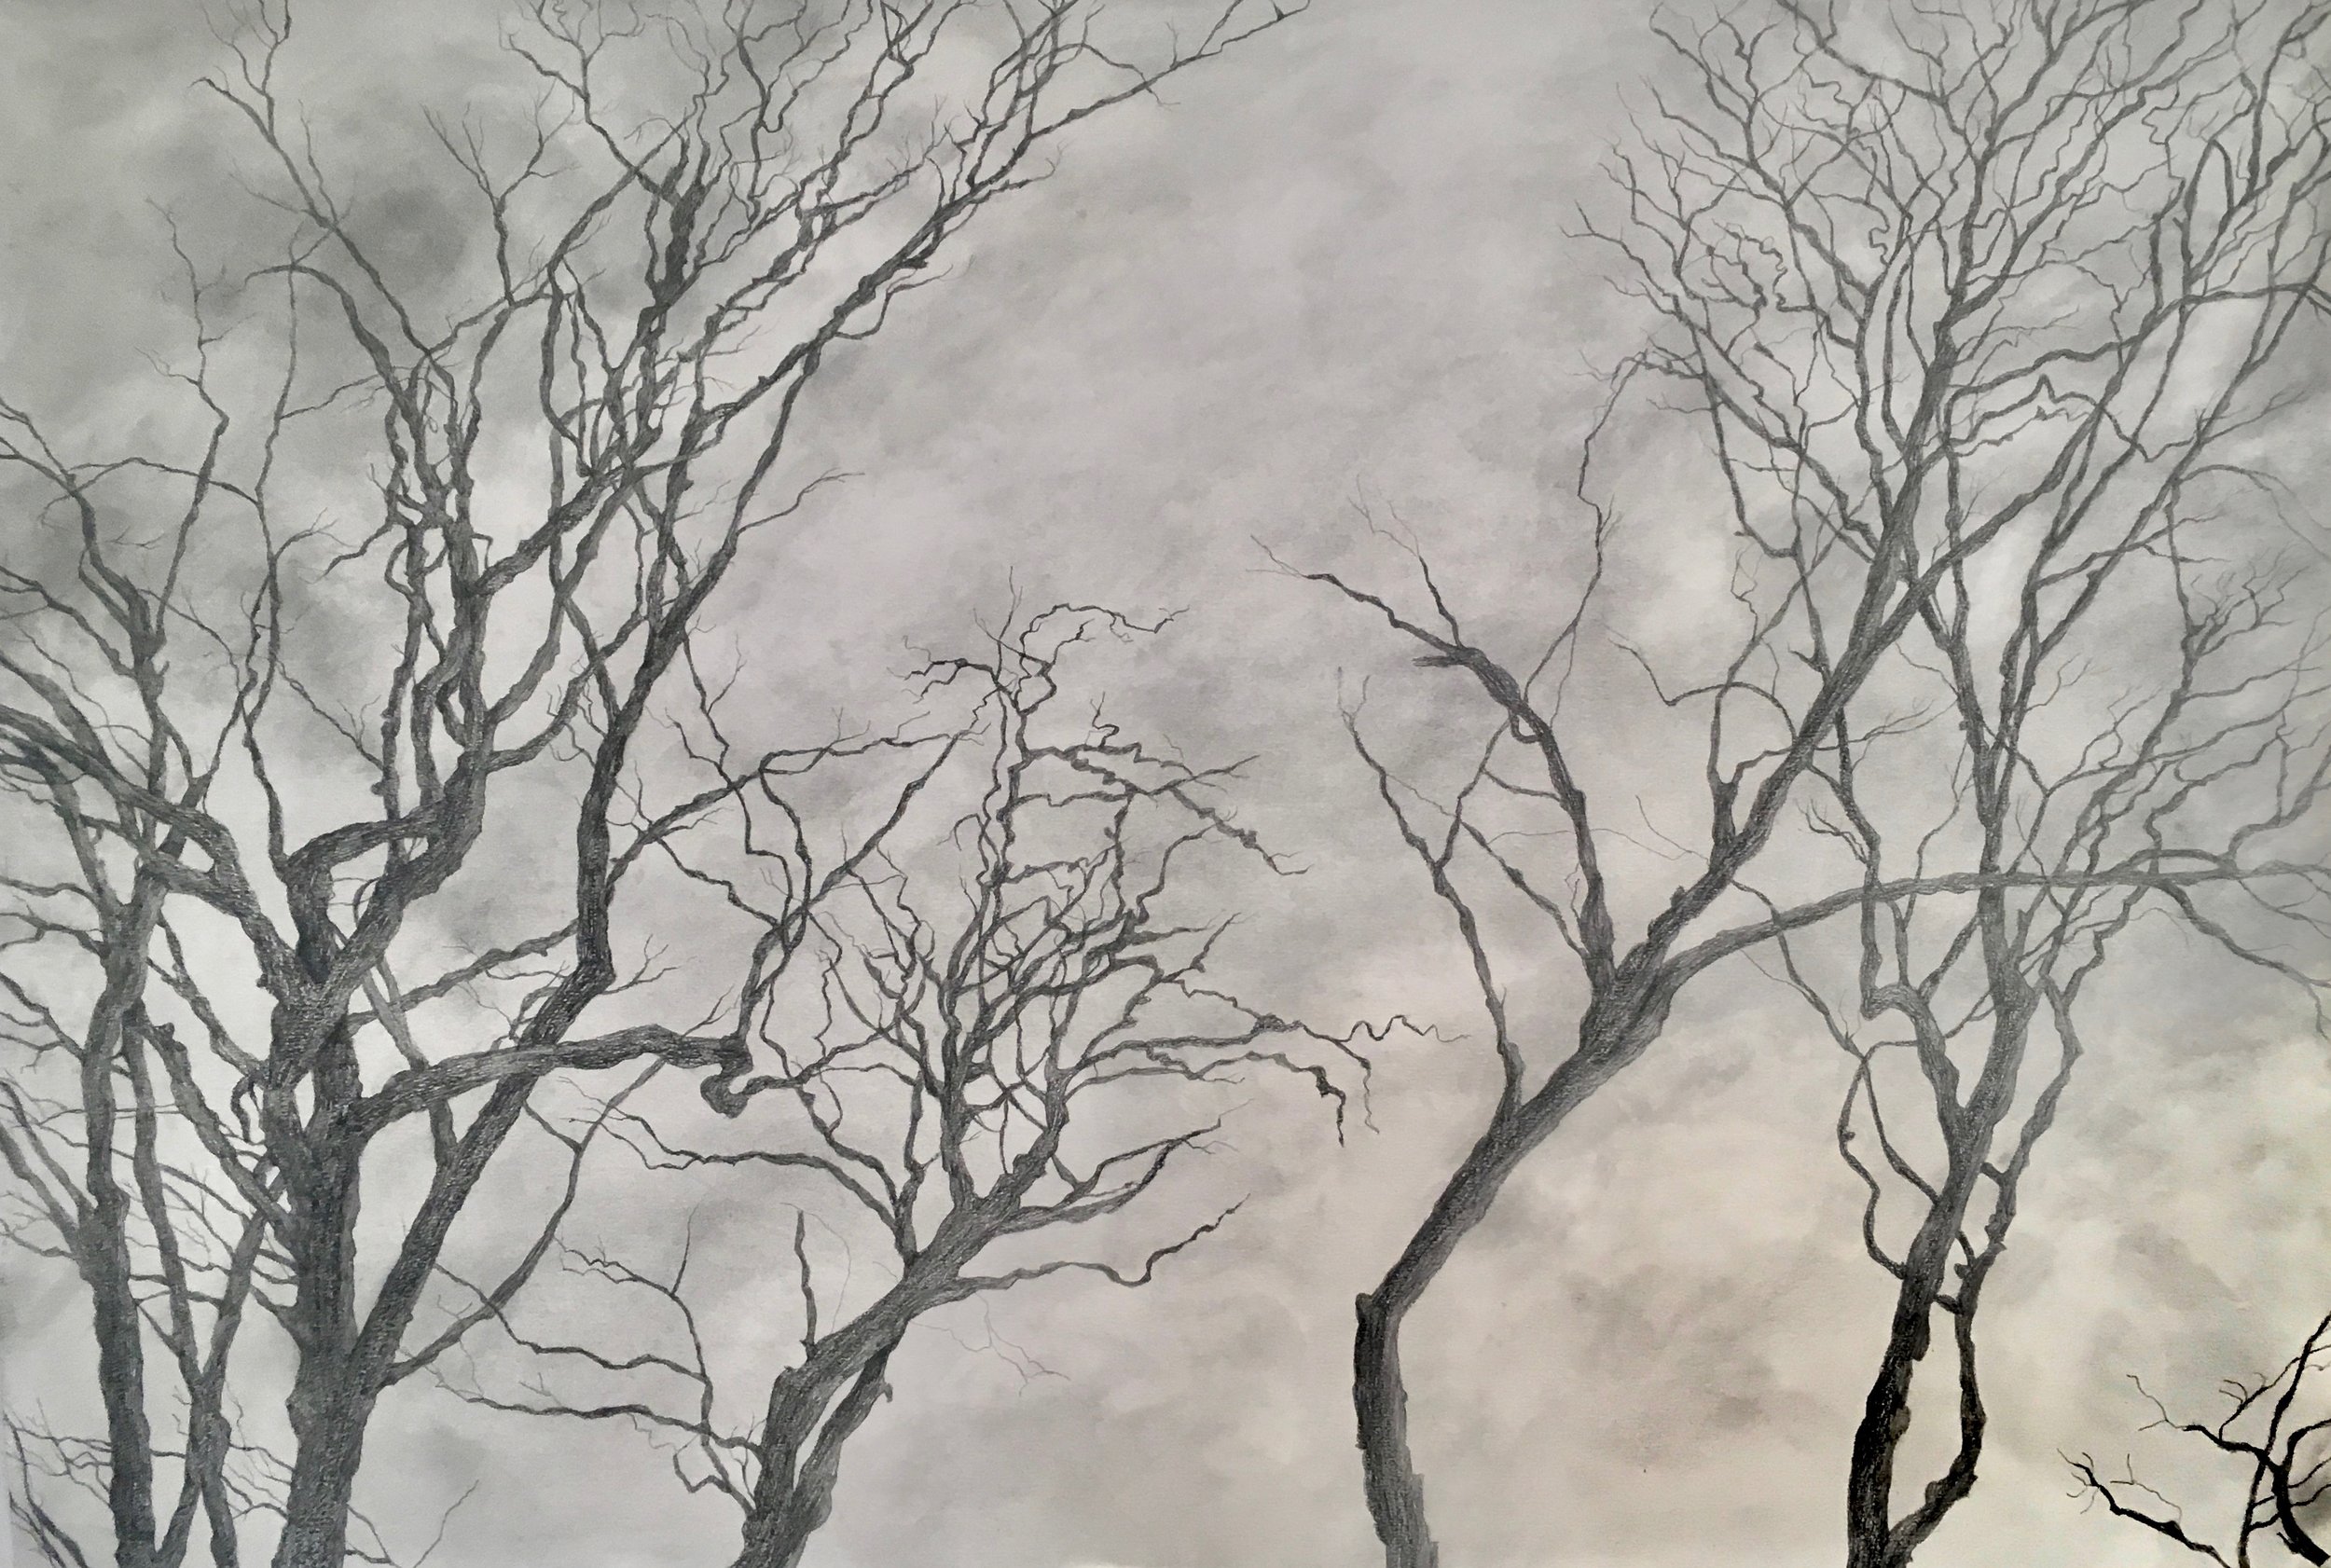 Trees II, 2019, graphite on paper, 44 x 27 in, $3,700